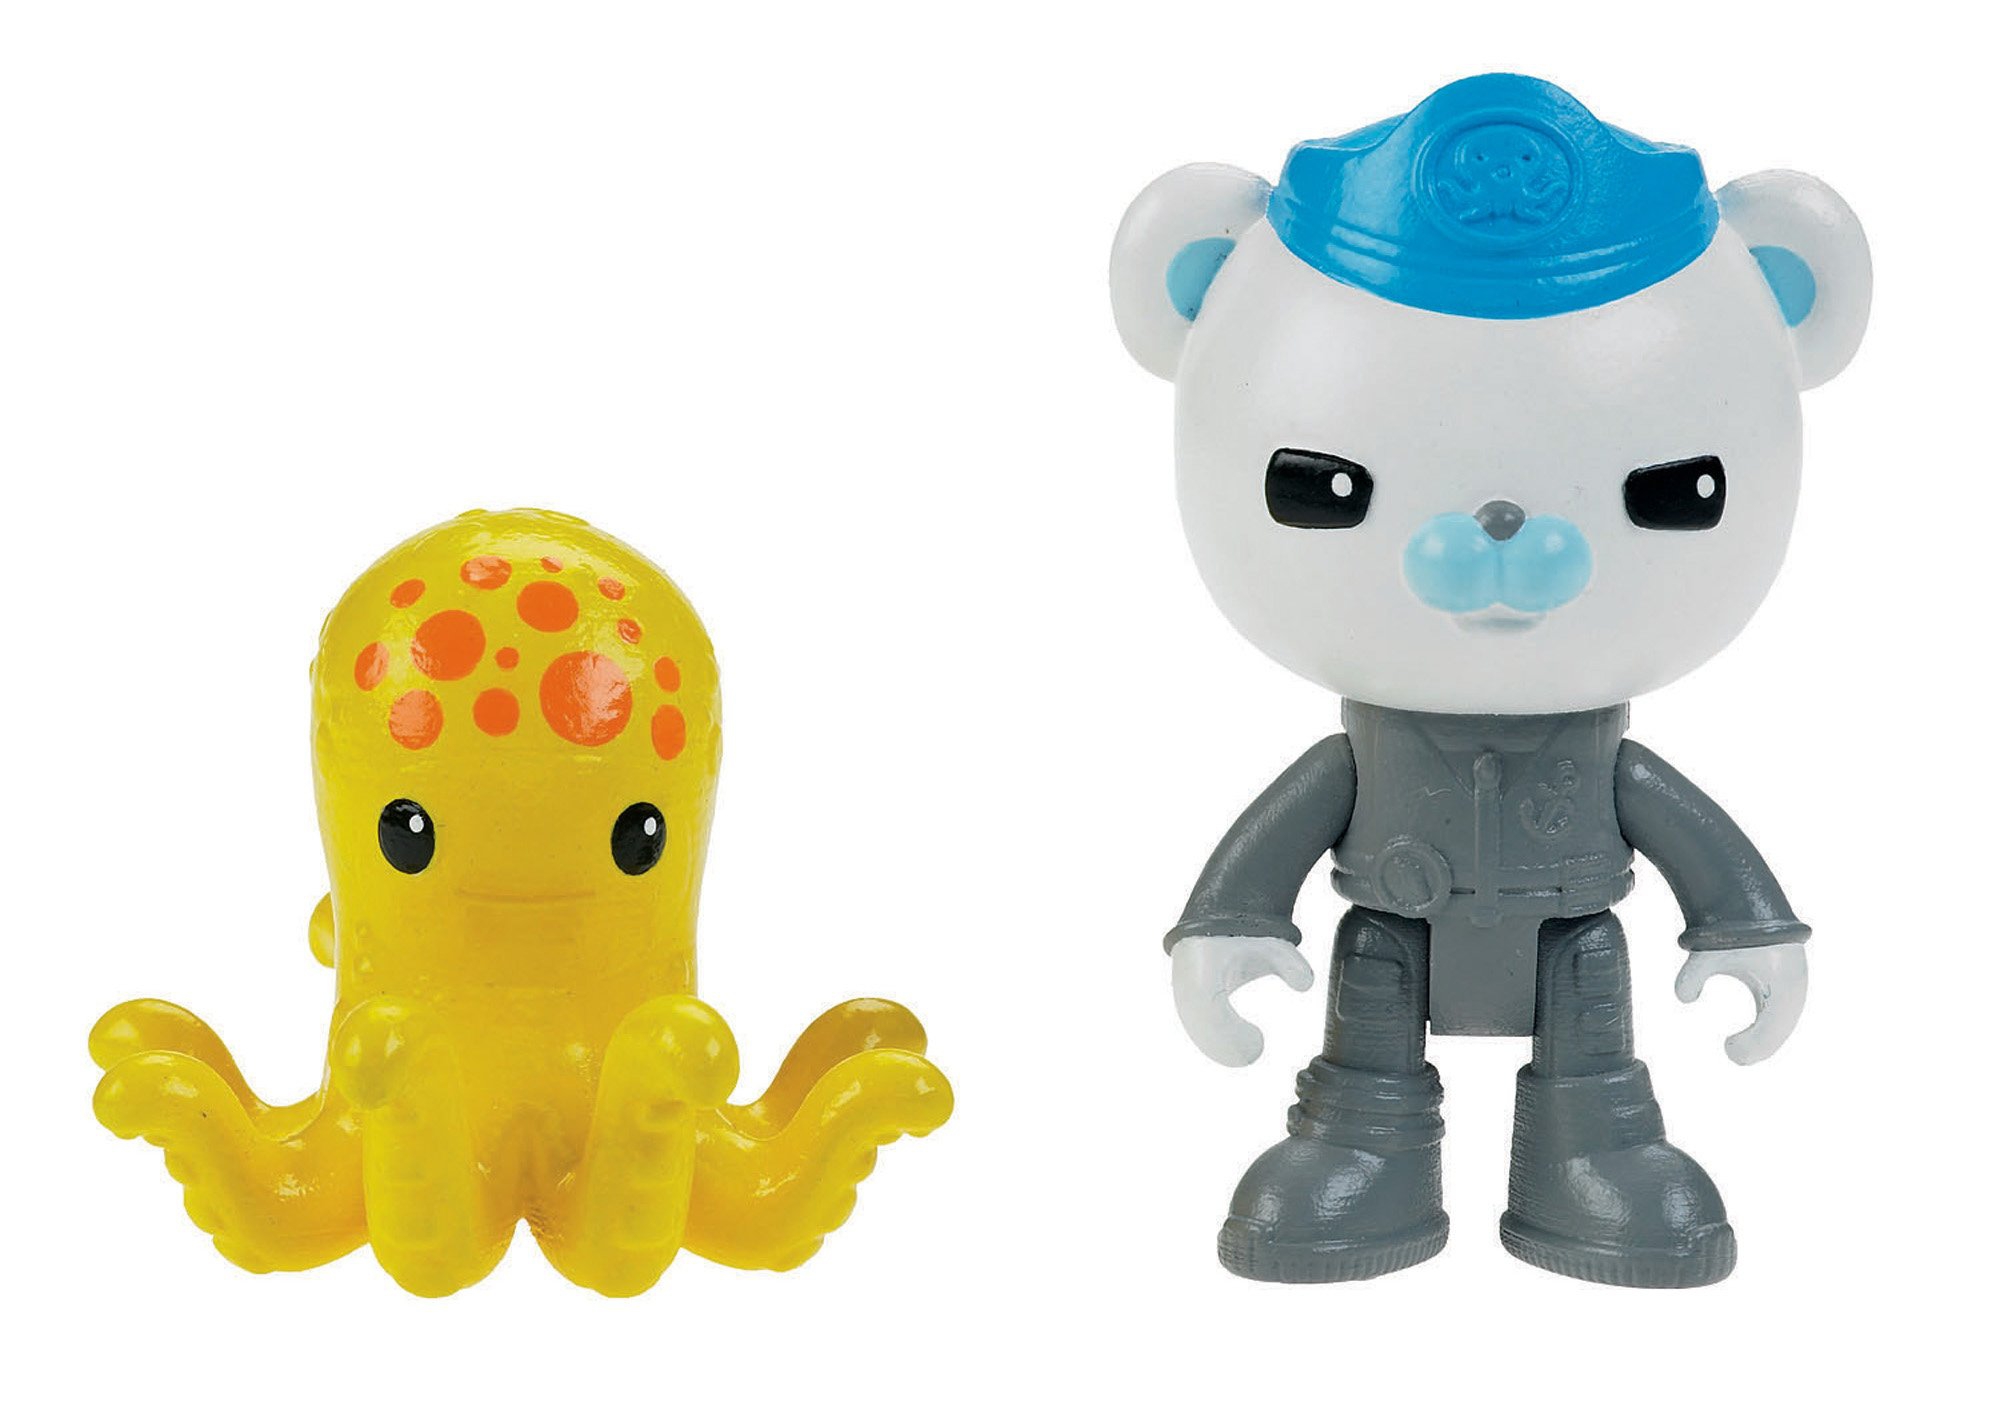 Octonauts & Create Pack 'Barnacles The Octopus' Figure Toy